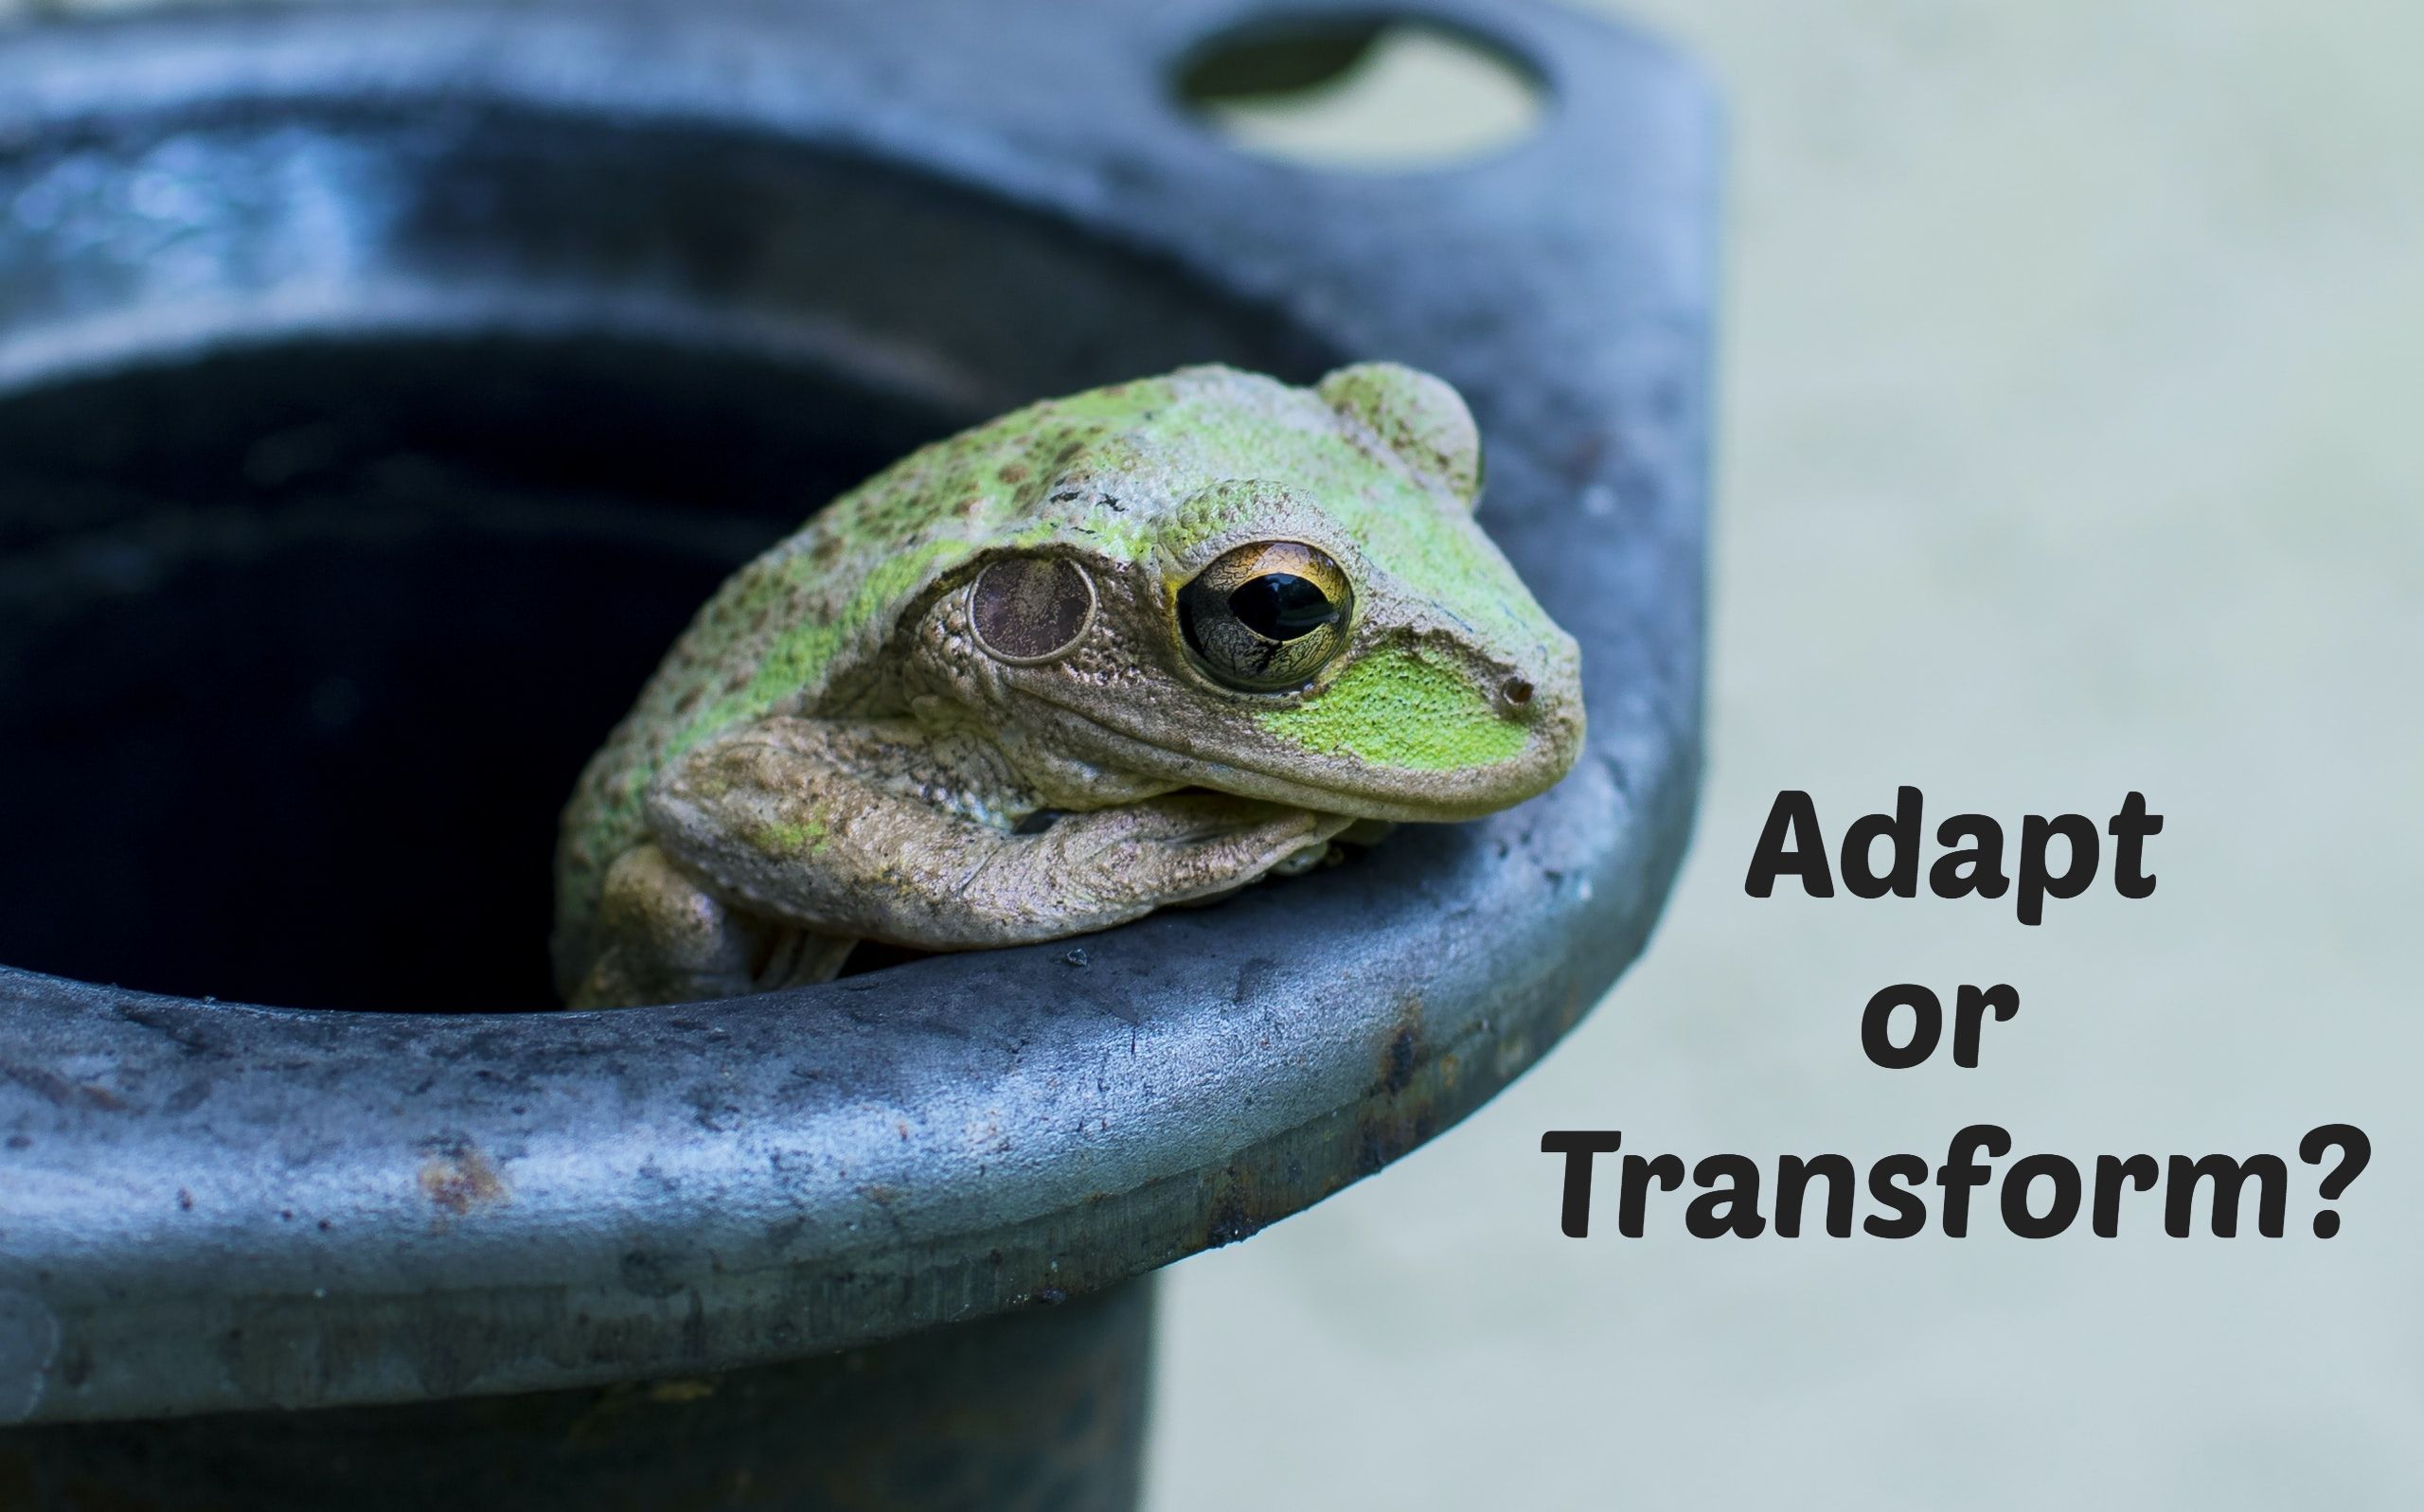 Frog in pot - Adapt or Transform?